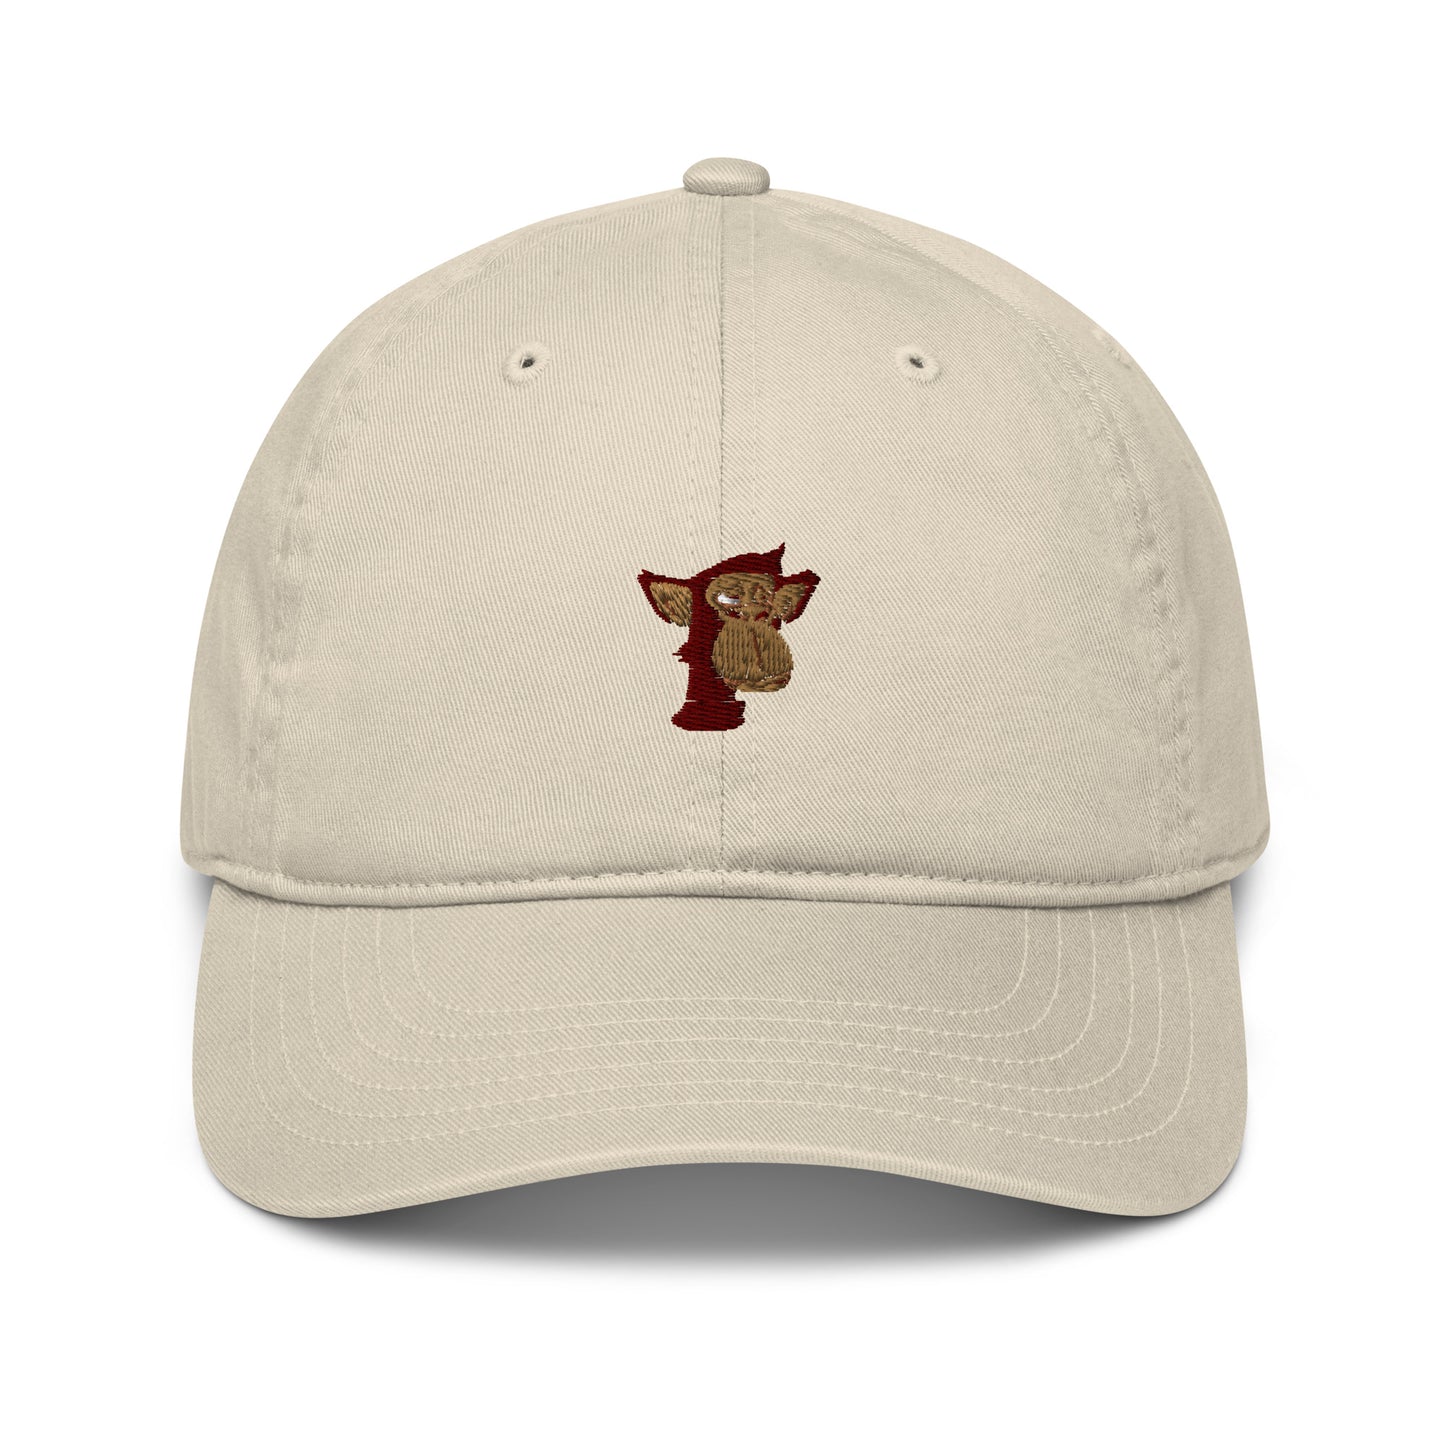 Organic dad hat feat Polygon Ape YC #6437 (embroidered)